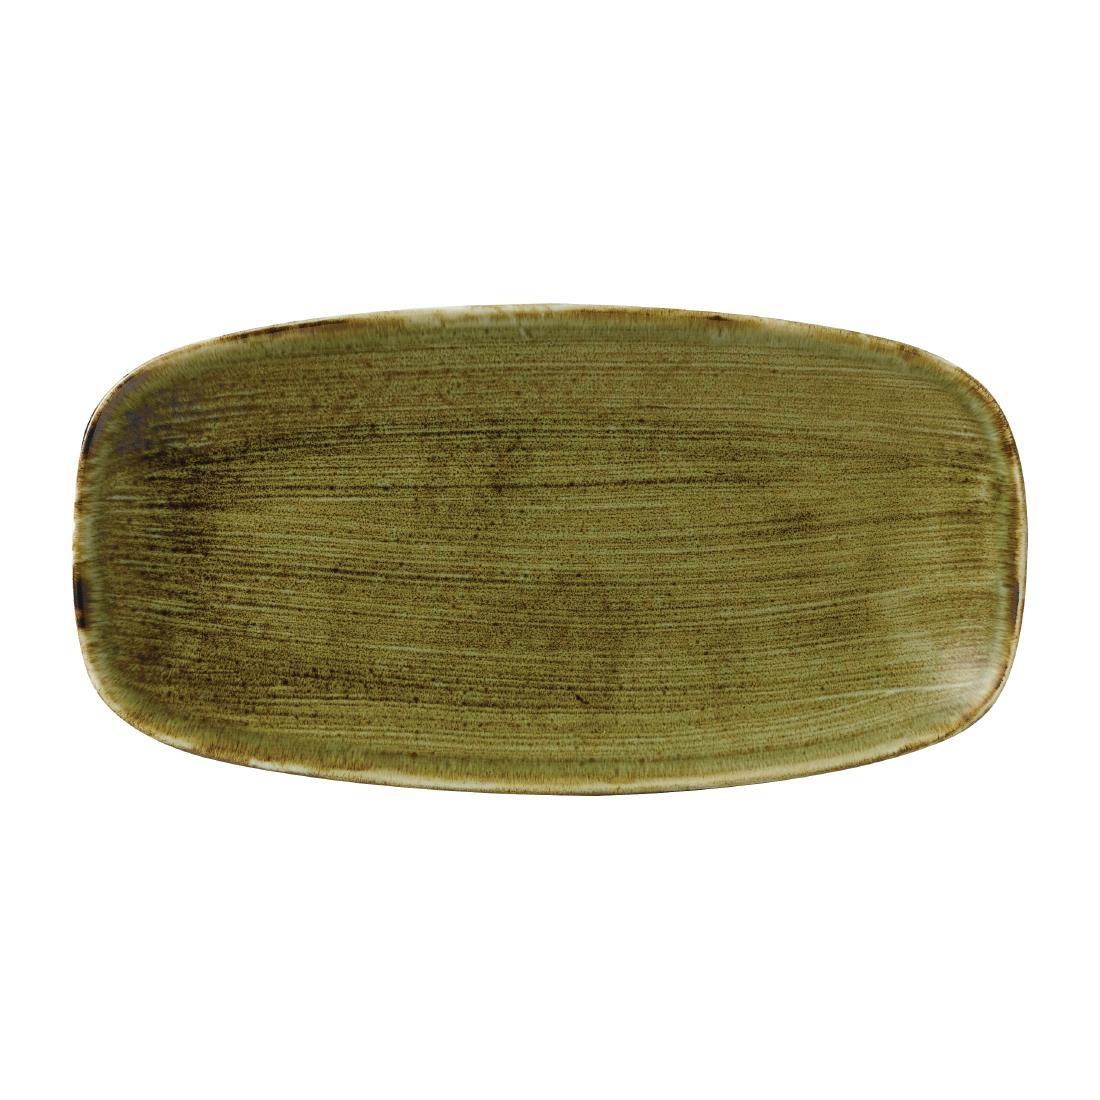 Stonecast Plume Olive Chefs' Oblong Plate No. 3 11 3/4 x 6 " (Pack of 12) - FJ936  - 1